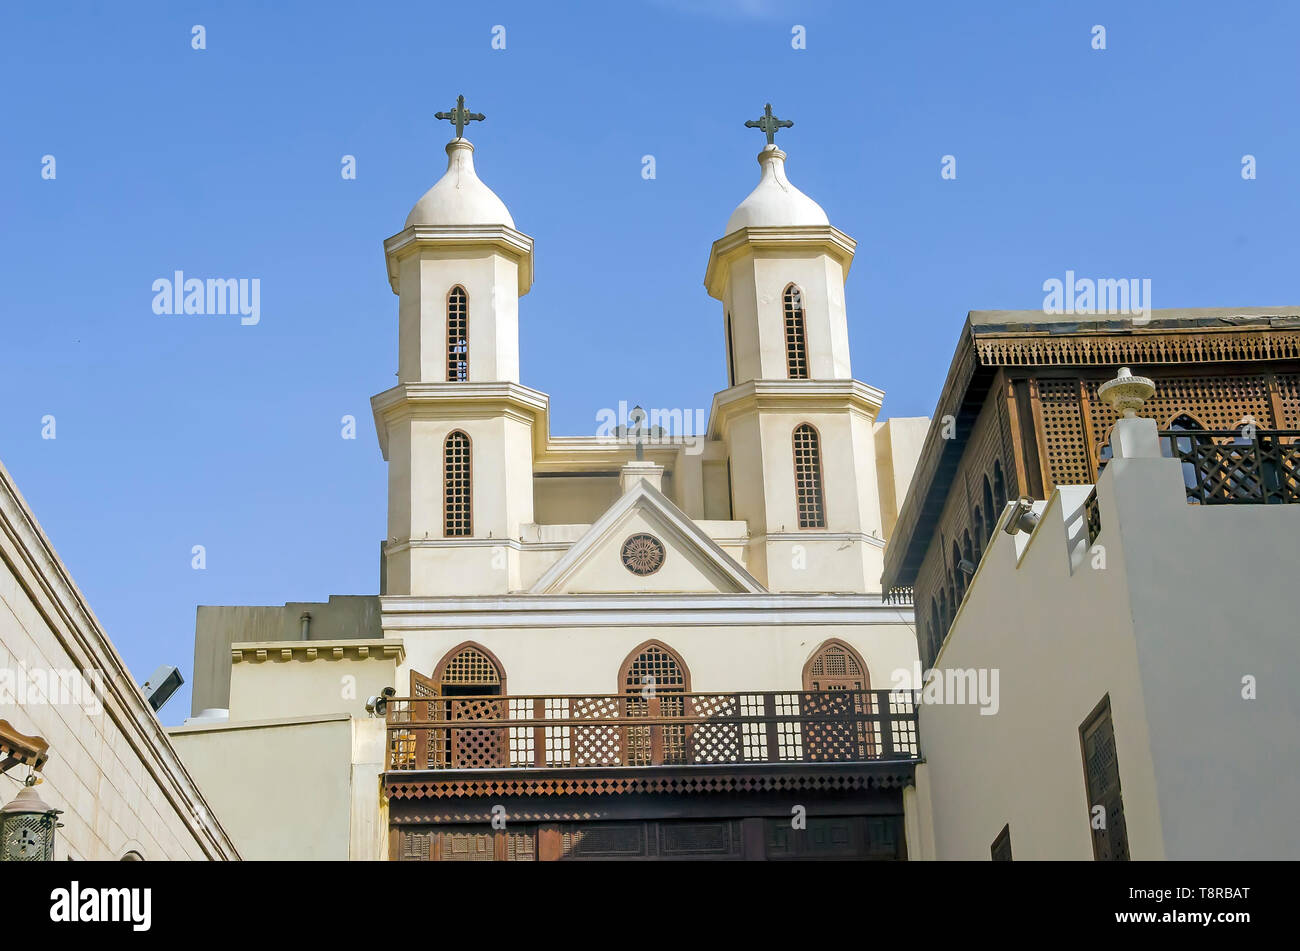 Steeple  of  Saint Virgin Mary's Coptic Orthodox Church also  known as the Hanging Church or Suspended Church, Cairo, Egypt Stock Photo